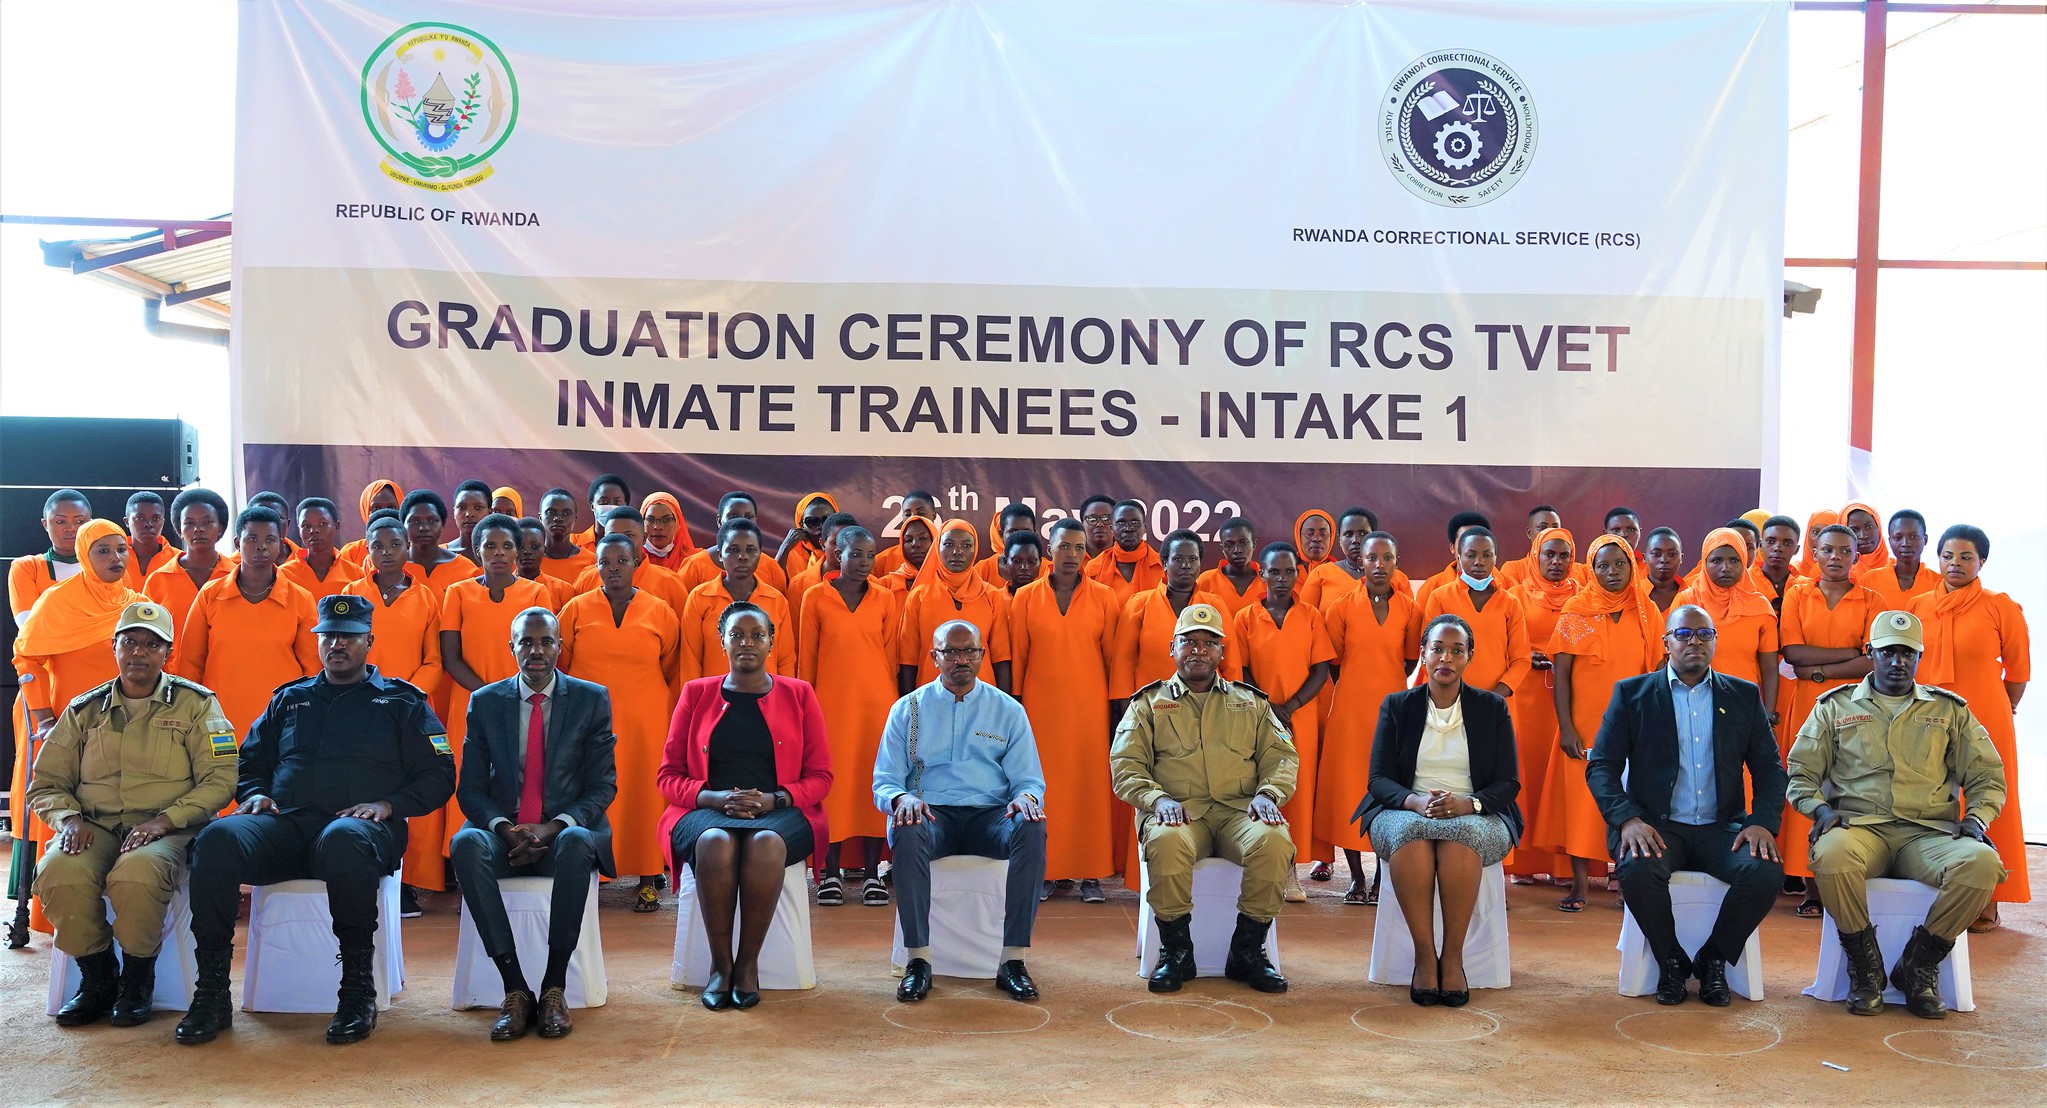 Officials pose for a group photo with graduates who completed their courses